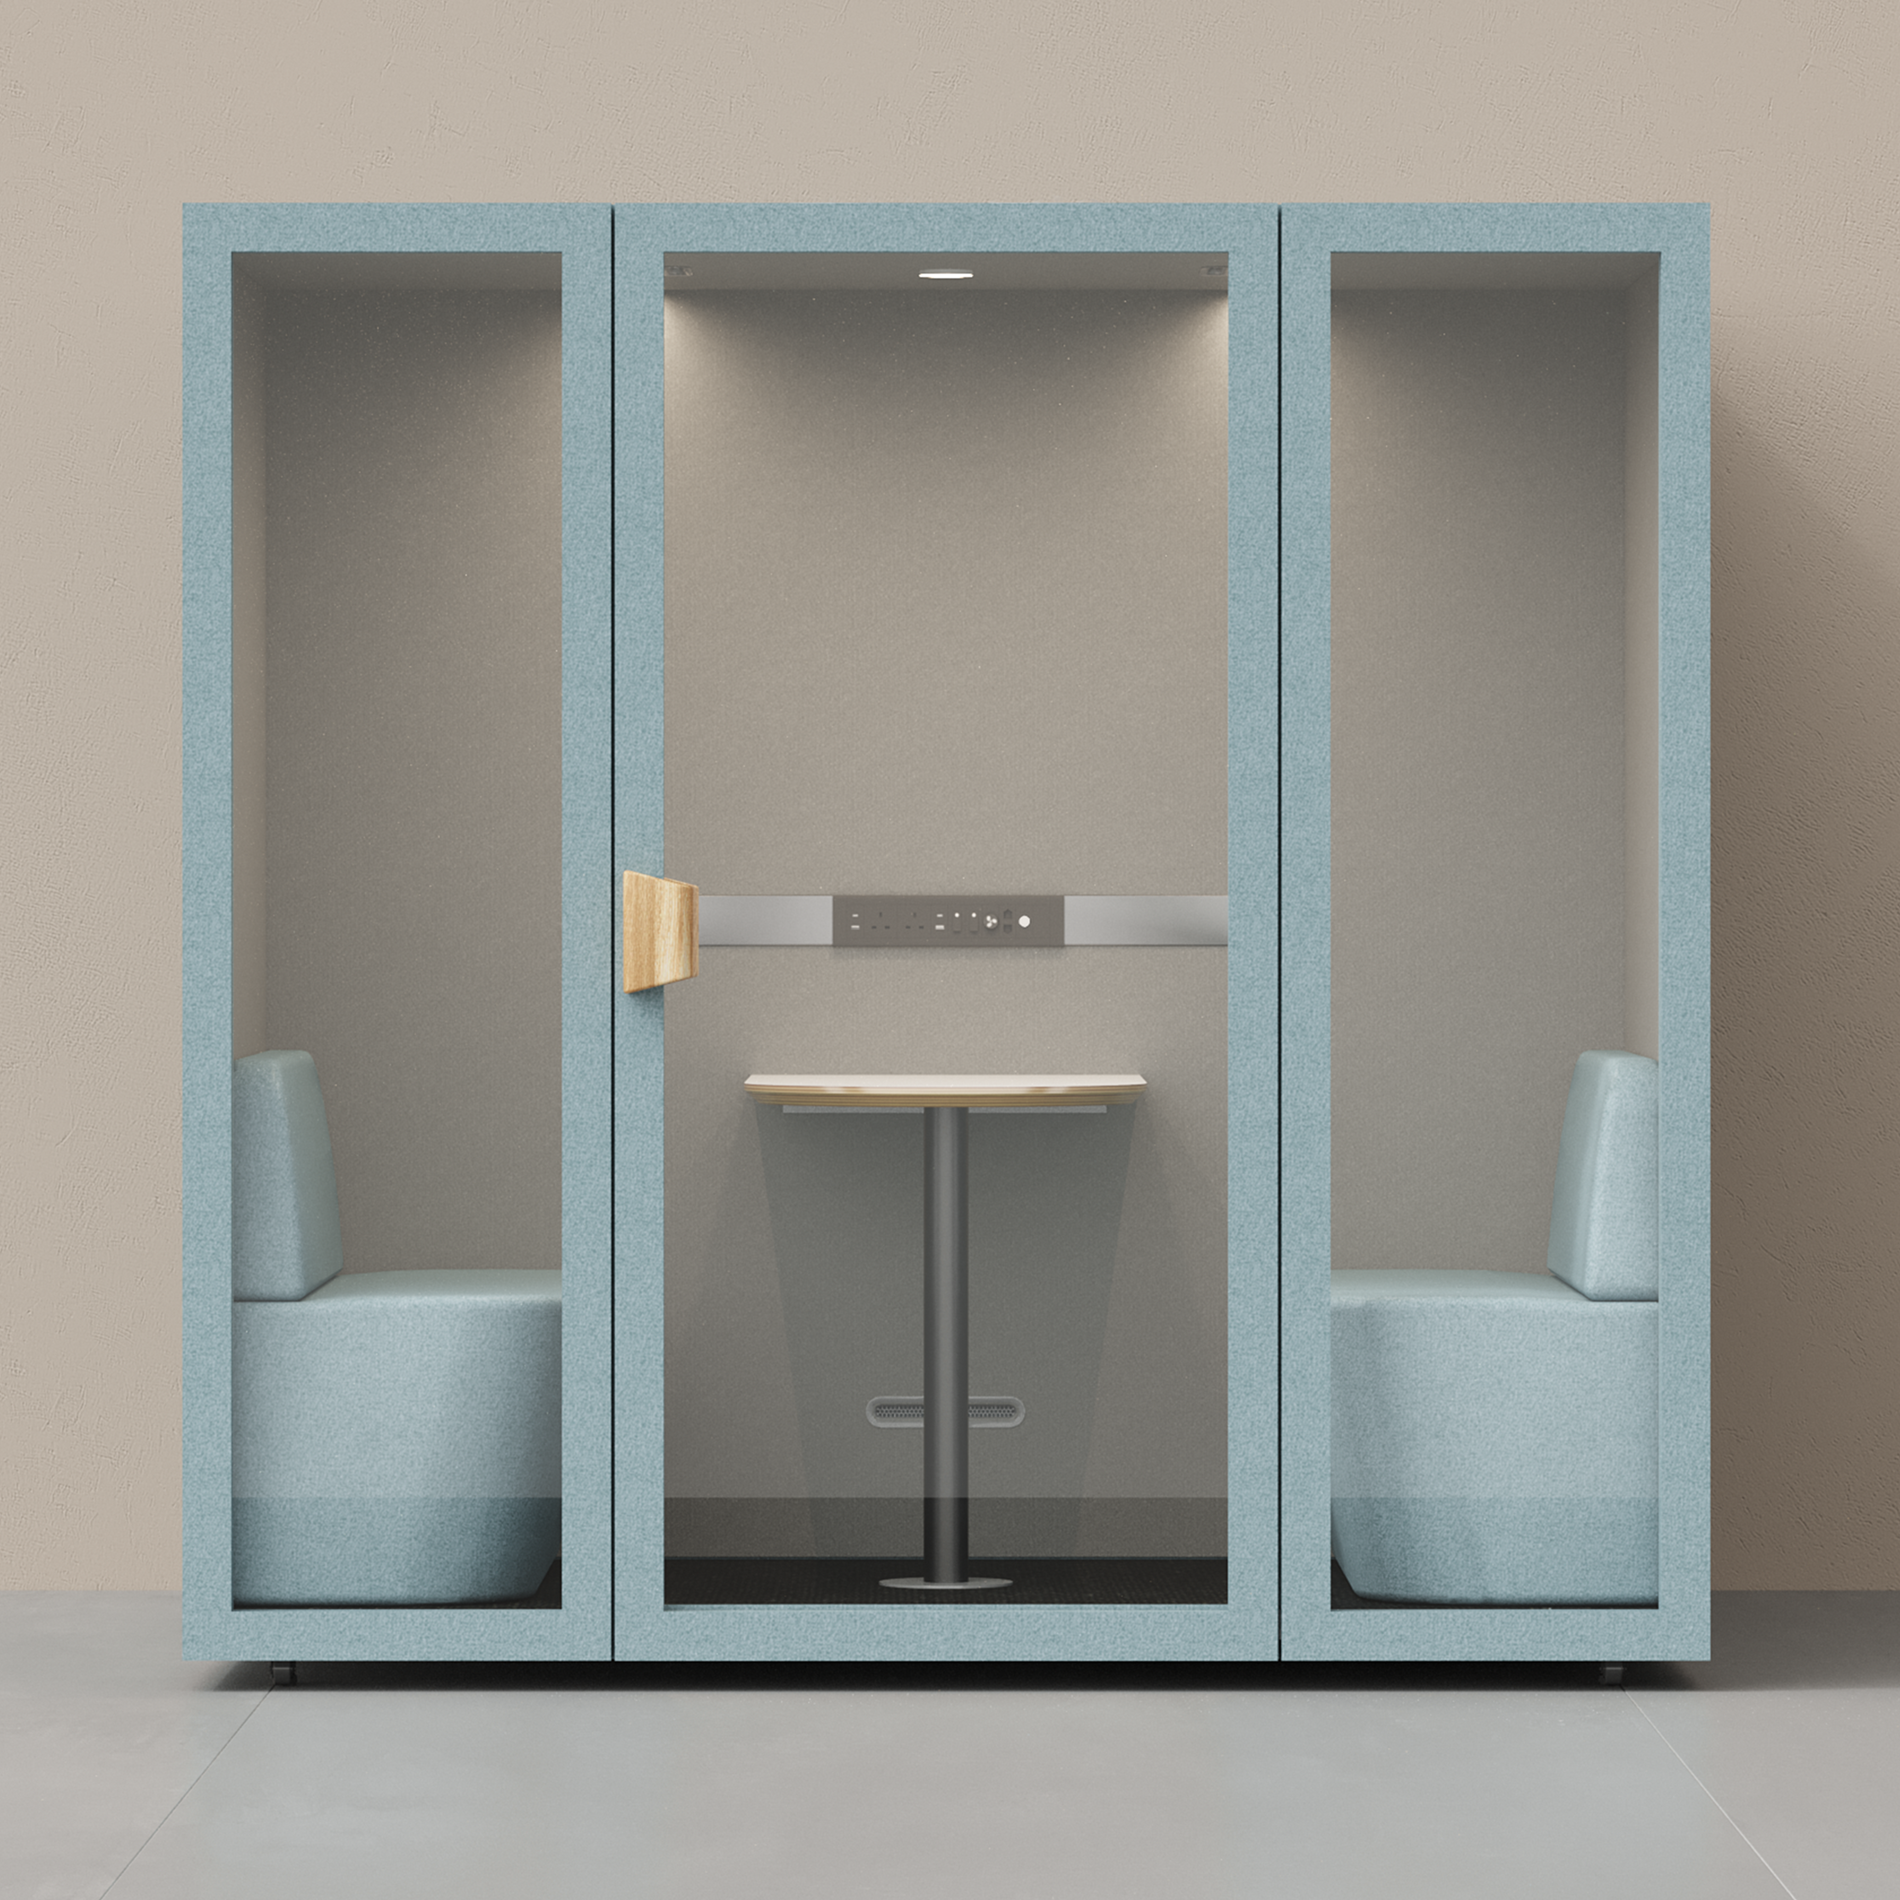 2 - 4 Person Meeting BoothFolio Dusty Teal / Furniture As Per Images